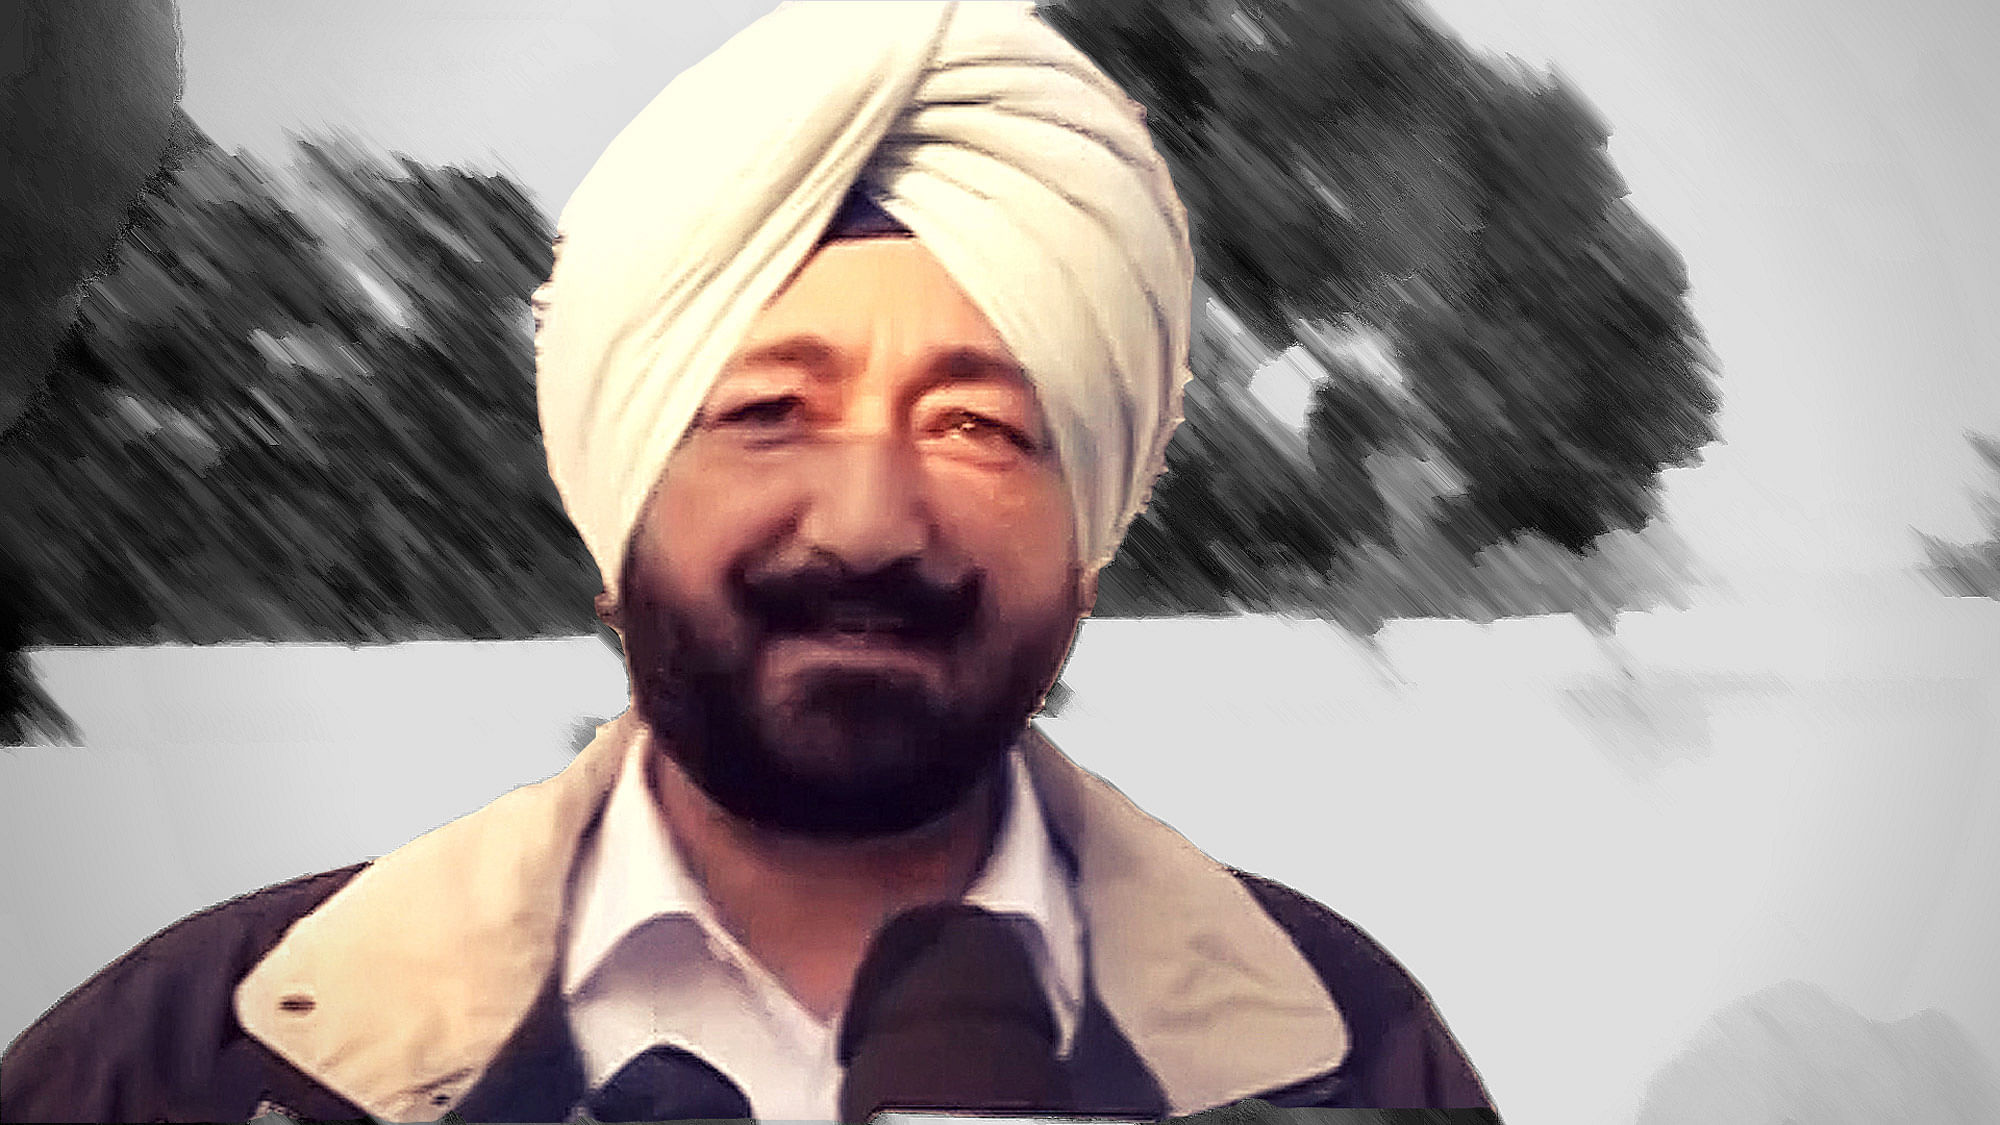 SP Salwinder Singh is on the run following the rape case which was registered against him on Thursday. (Photo: ANI screengrab/Altered by <b>The Quint</b>) 